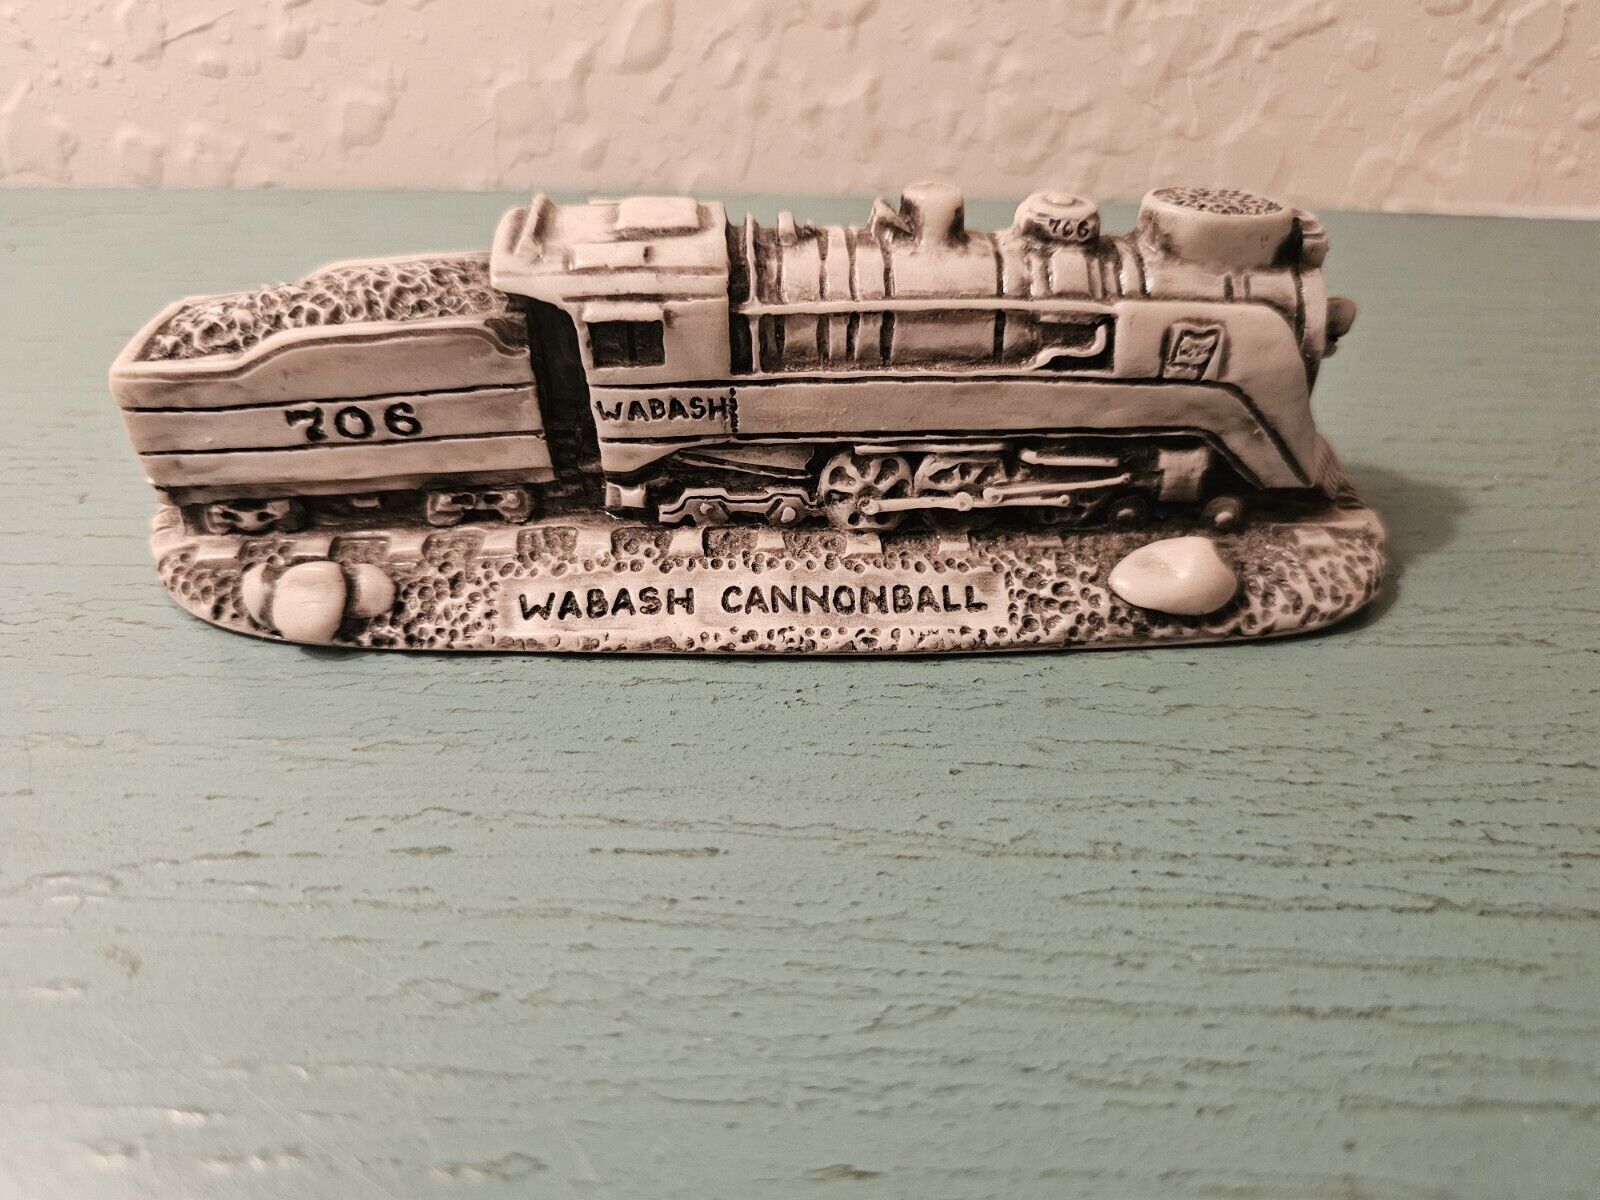 Vintage Georgia Marble Trains Gone By Limited Edition Wabash 706 Train